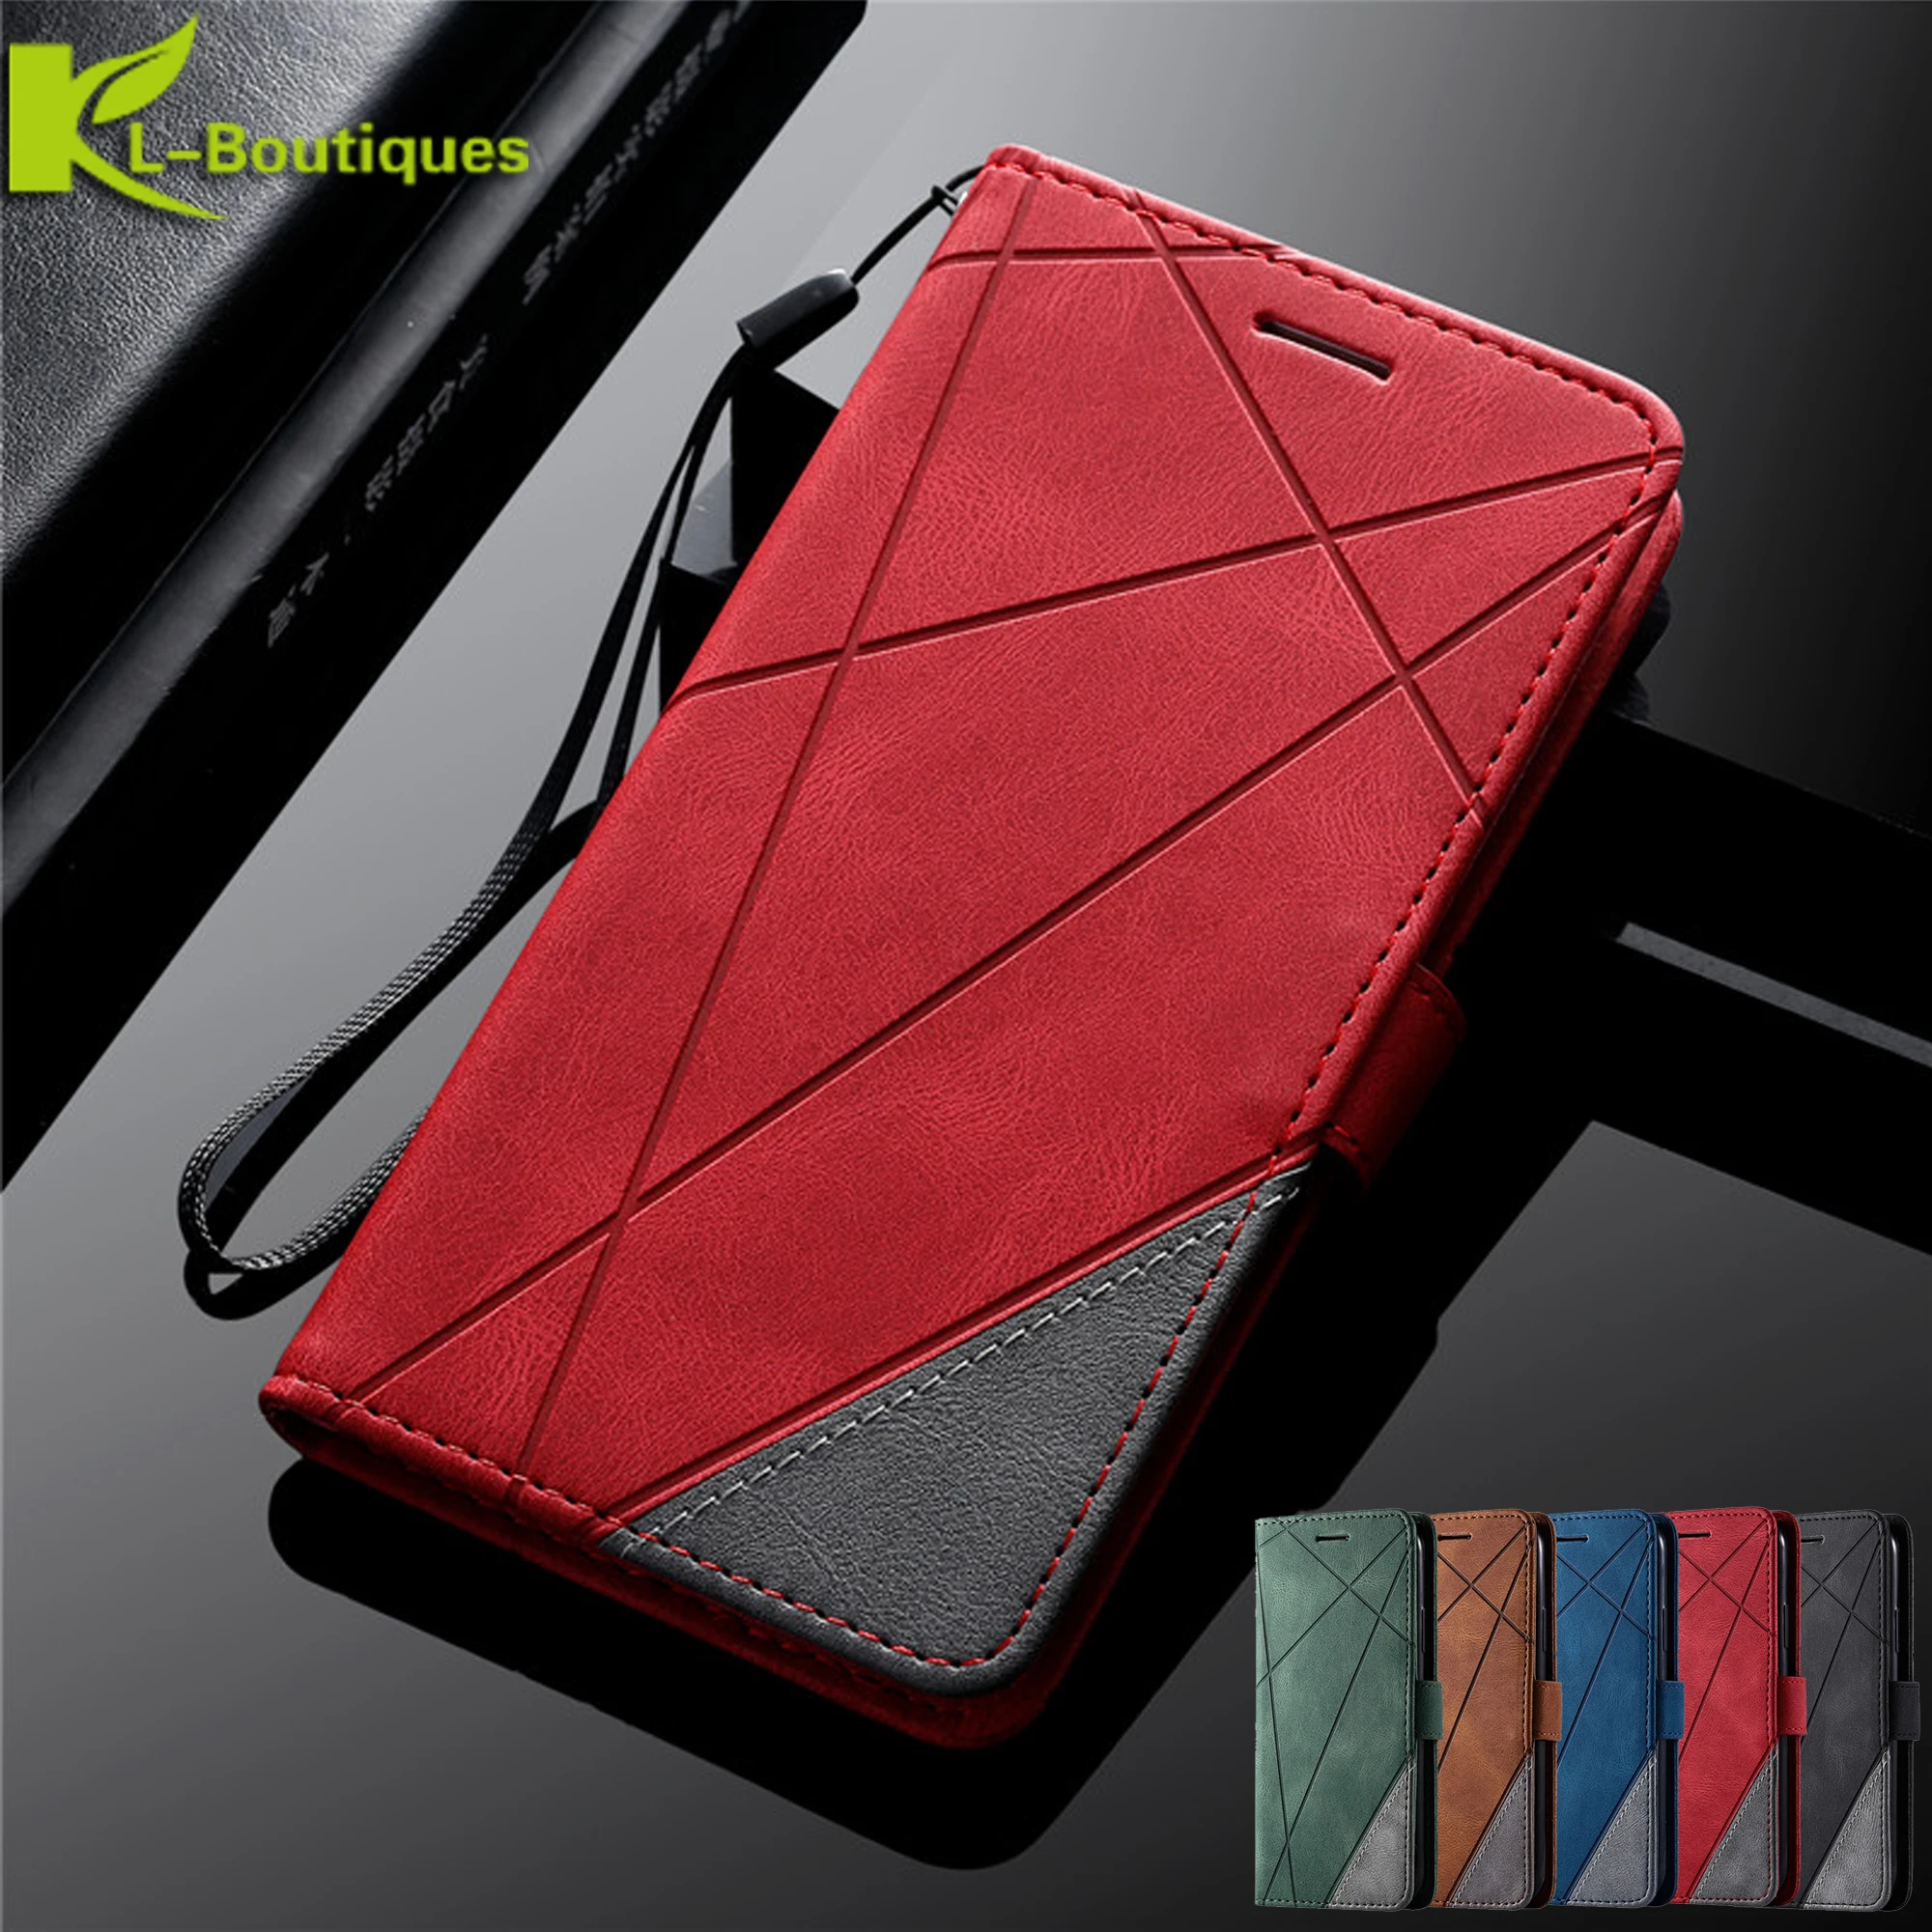 

A21s Case on For Funda Samsung Galaxy A21s A217 SM-A217F Wallet Card Slot Coque For Samsung A21 A 21 A215 Flip Protect Cover